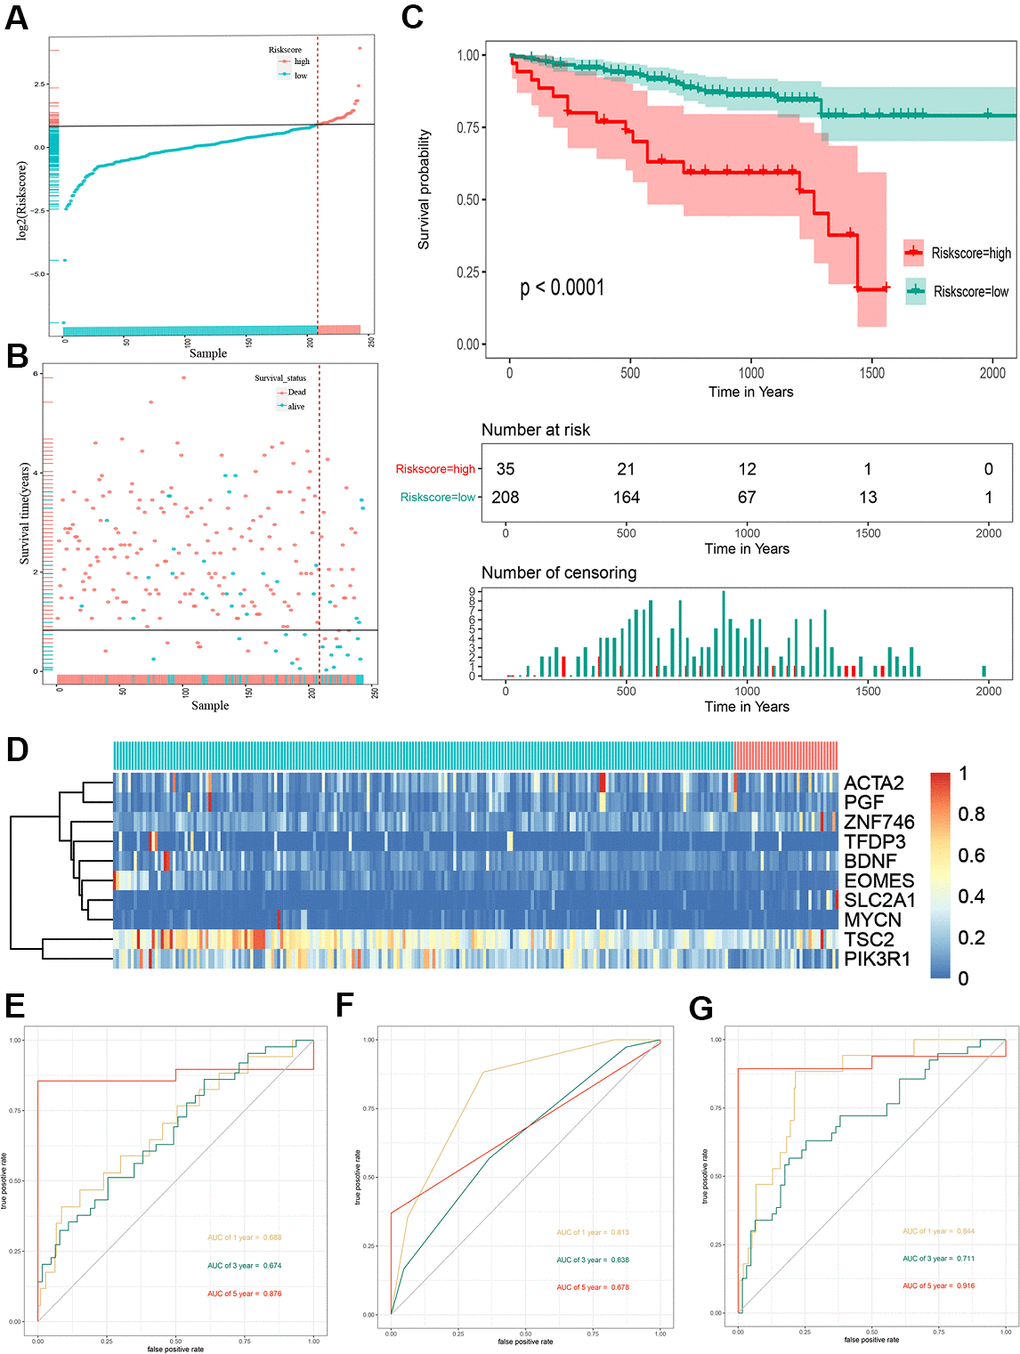 Risk score analysis, Kaplan-Meier analysis and time-dependent ROC analysis of ten-gene signature in ICGC cohort. (A) Risk score analysis of ten-gene signature in ICGC cohort. (B) Distribution of risk score. (C) Kaplan-Meier analysis of ten-gene signature in ICGC cohort. (D) Heatmap of ten gene signature. (E) Time-dependent ROC analysis of ten-gene signature in total cohort. (F) Time-dependent ROC analysis of ten-gene signature in training set. (G) Time-dependent ROC analysis of ten-gene signature in testing set. ROC, receiver operating characteristic curve; ICGC, International Cancer Genome Consortium.